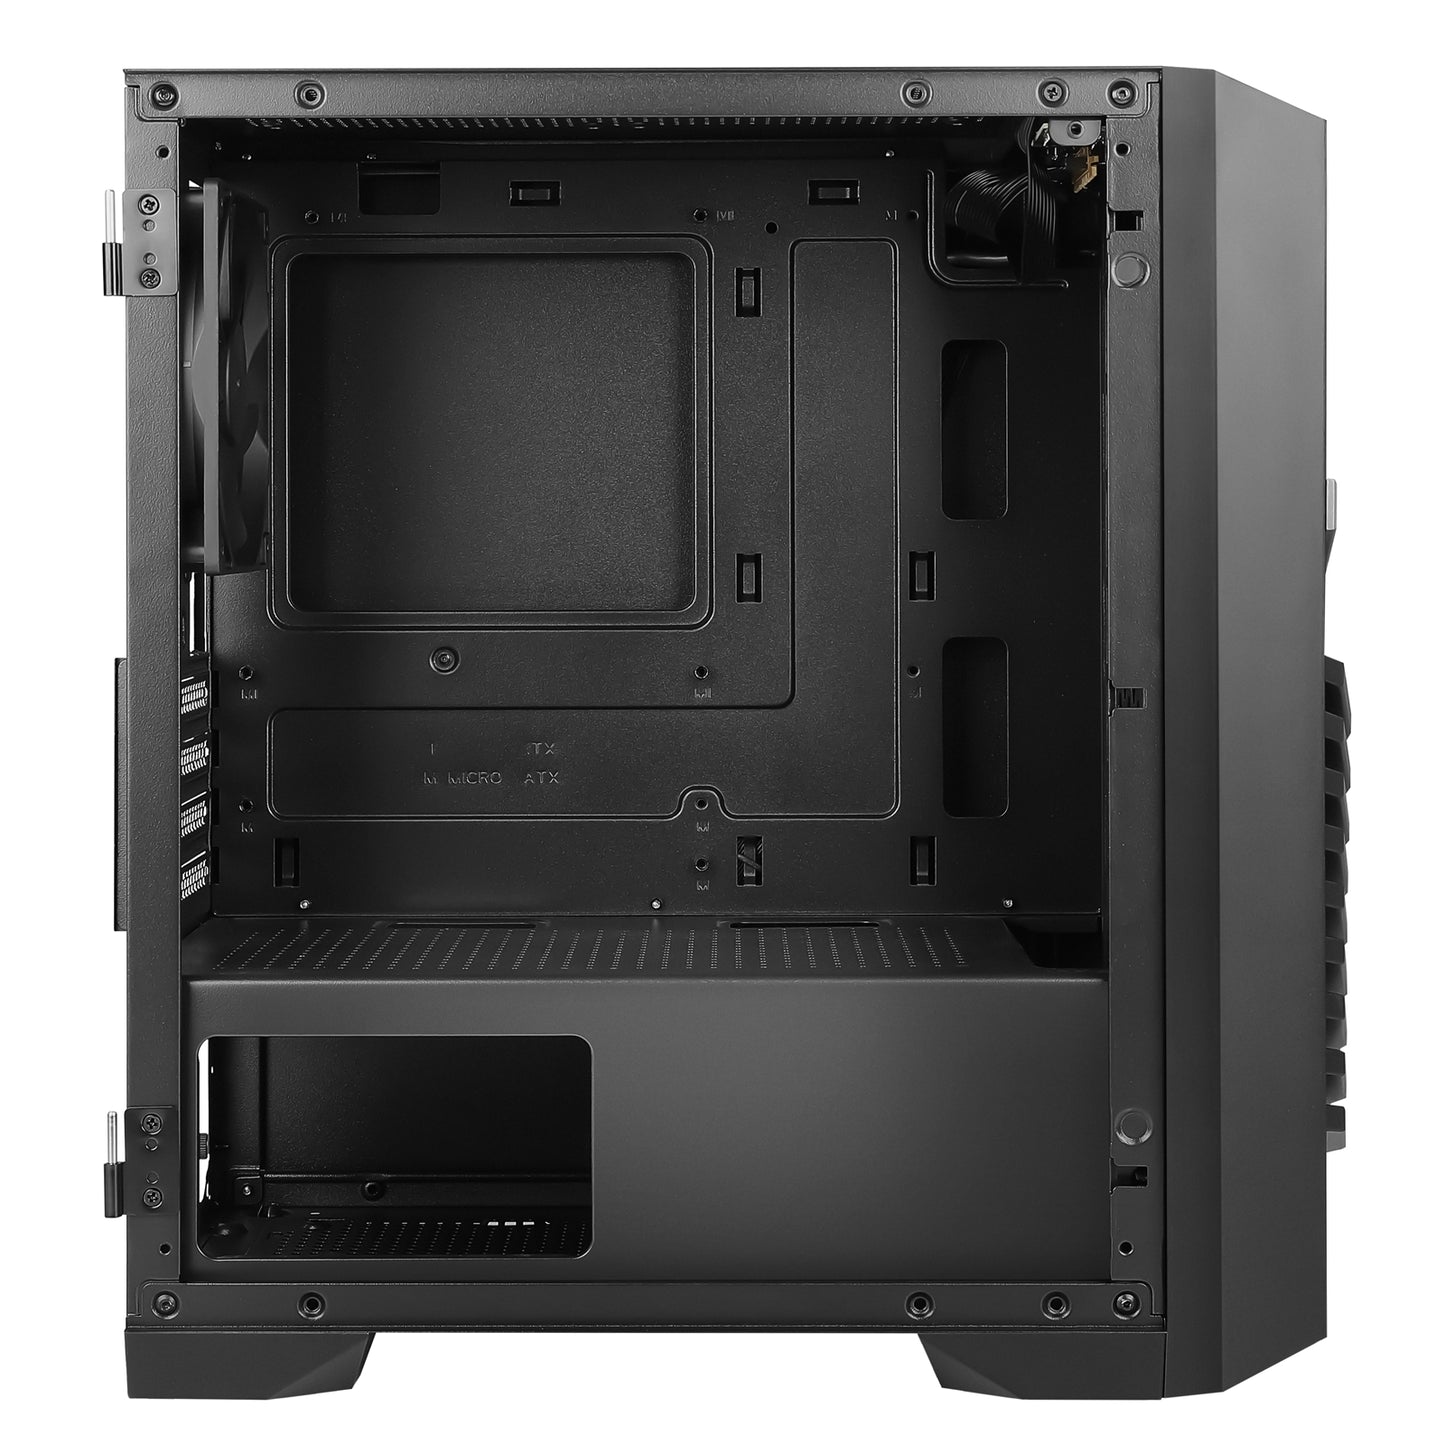 Antec DP31 RGB Mini Tower Gaming Case - Black With Glass Side Window